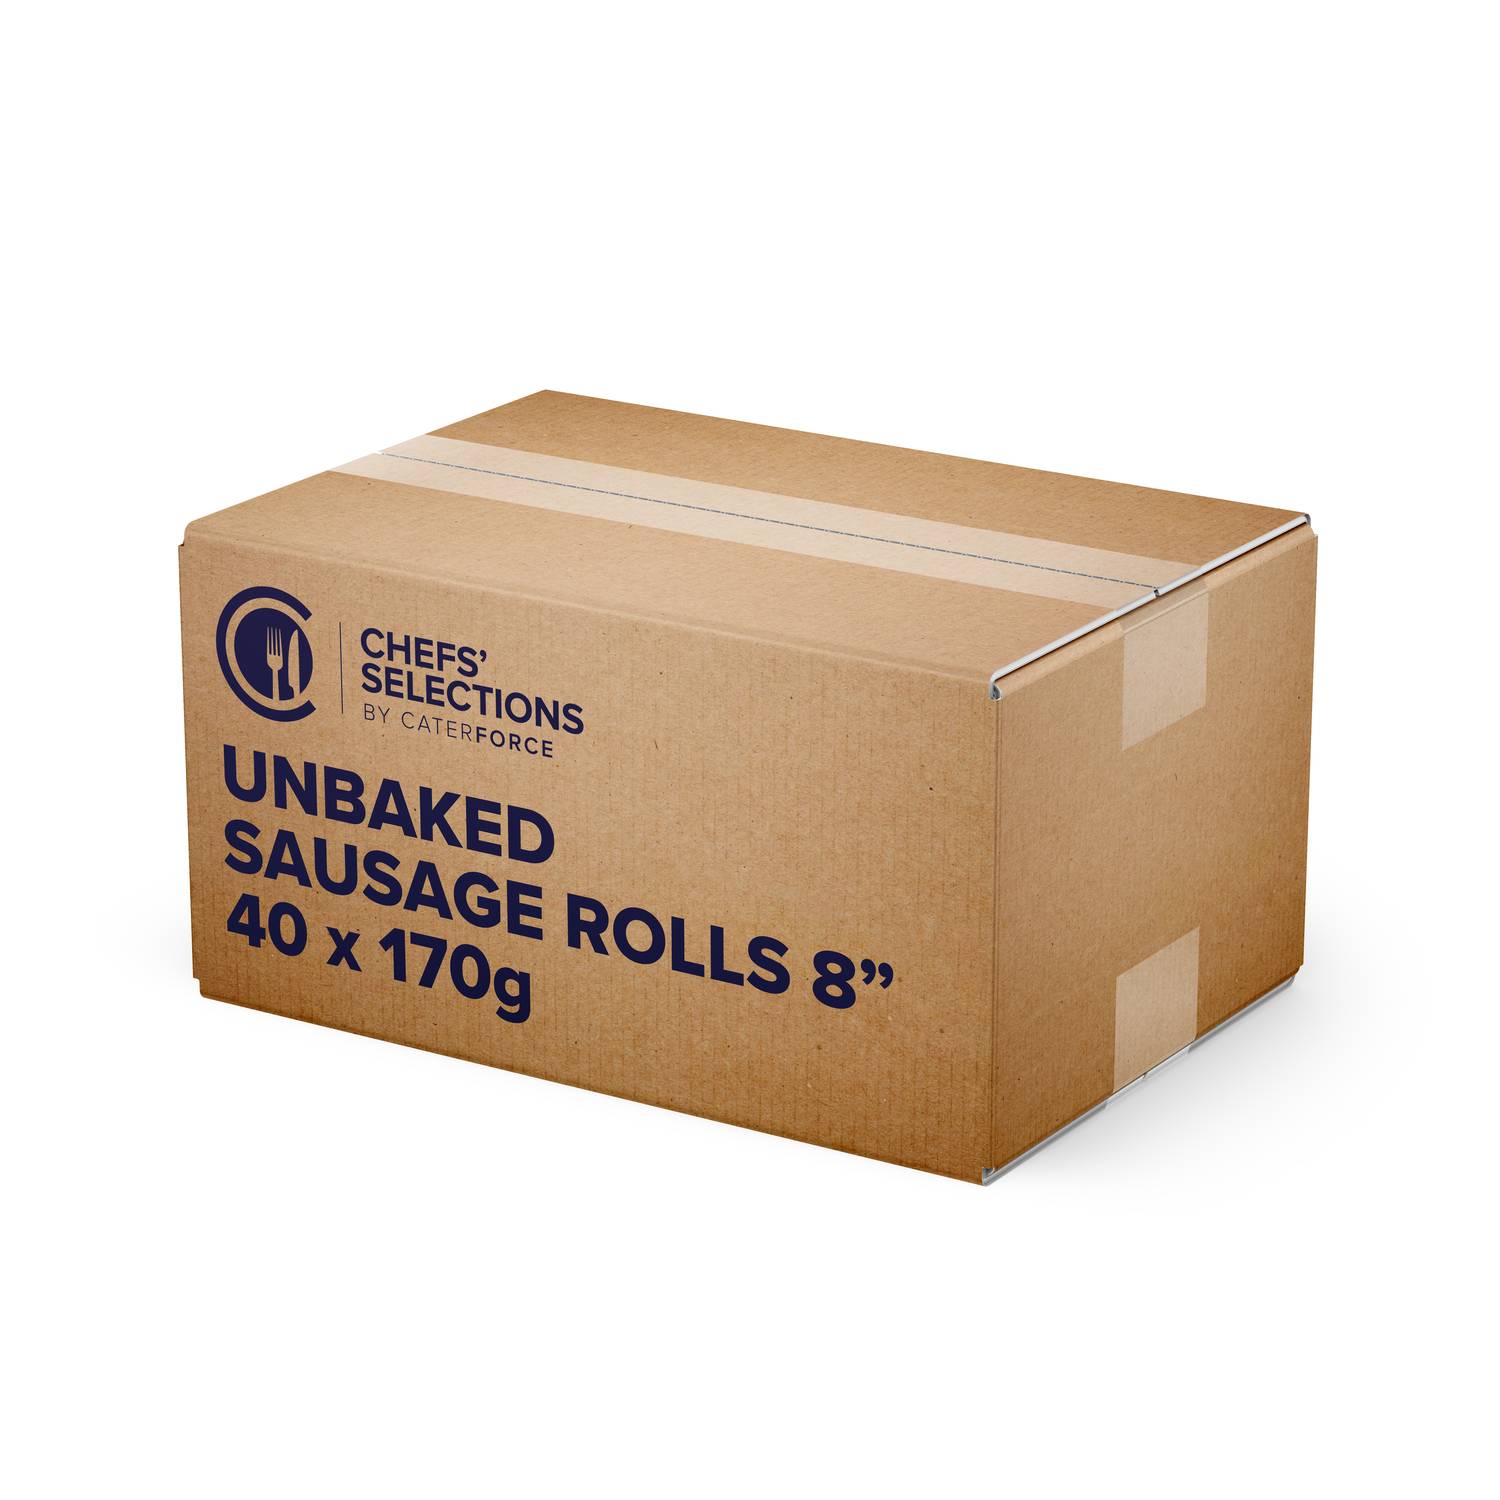 Chefs’ Selections 8″ Sausage Rolls (40 x 170g)